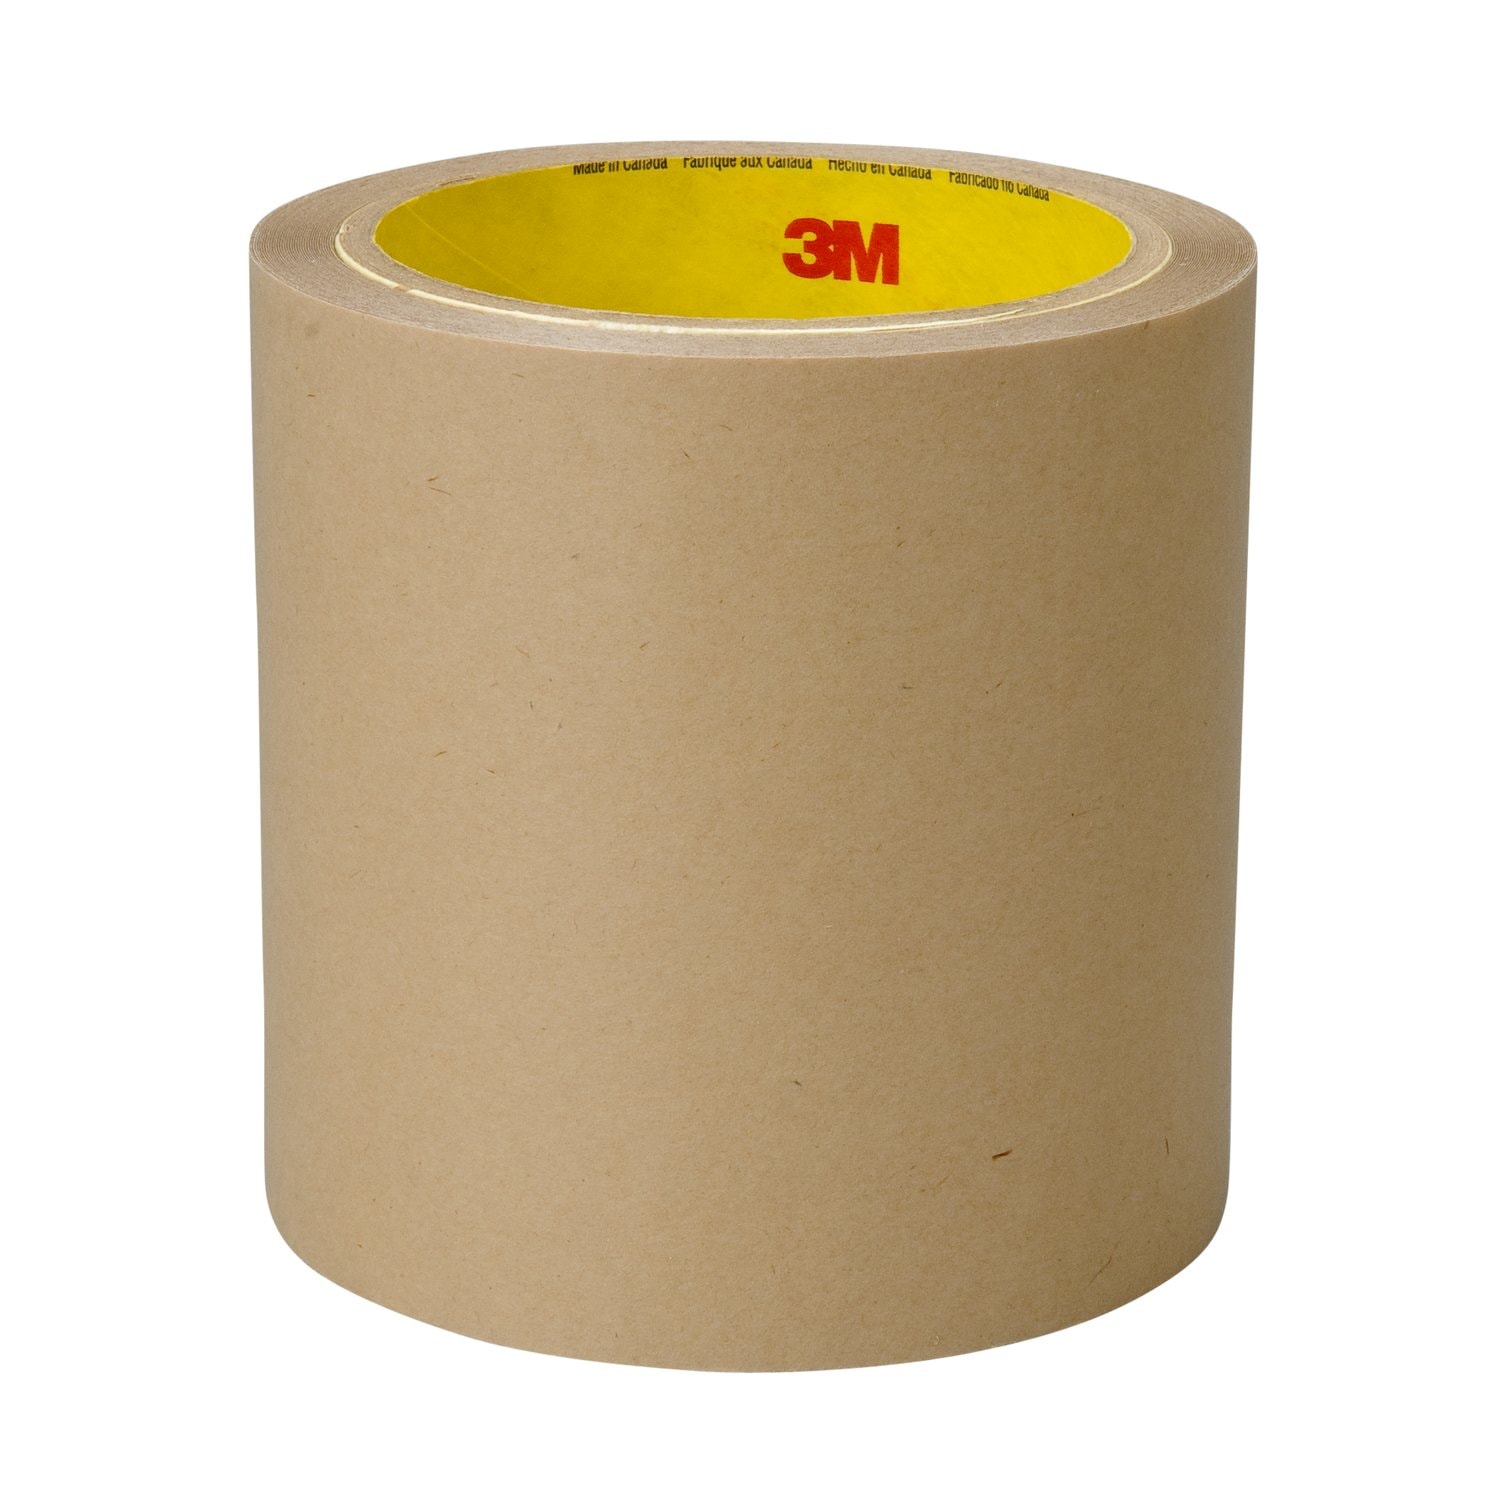 Double Stick Tape Paper Backing Natural Rubber/Resin Adhesive 33 Yard  Roll18 mm x 33 m / 2